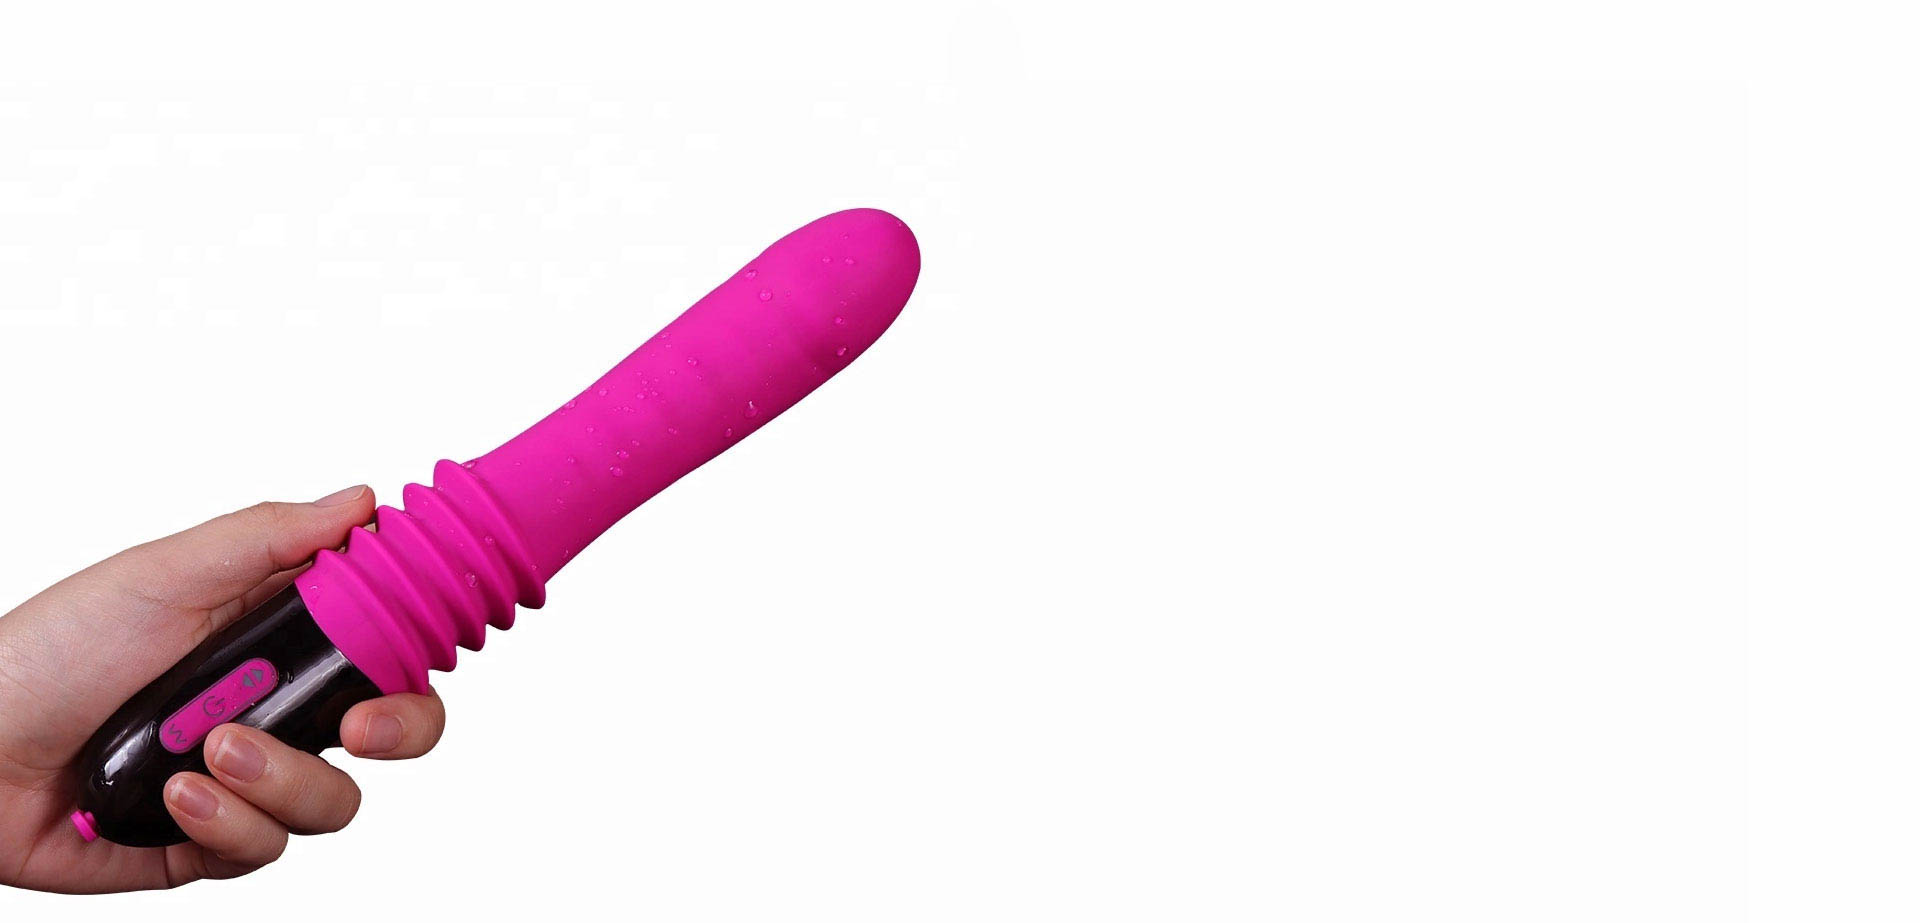 Waterproof rechargeable vibrating Thrusting dildo.